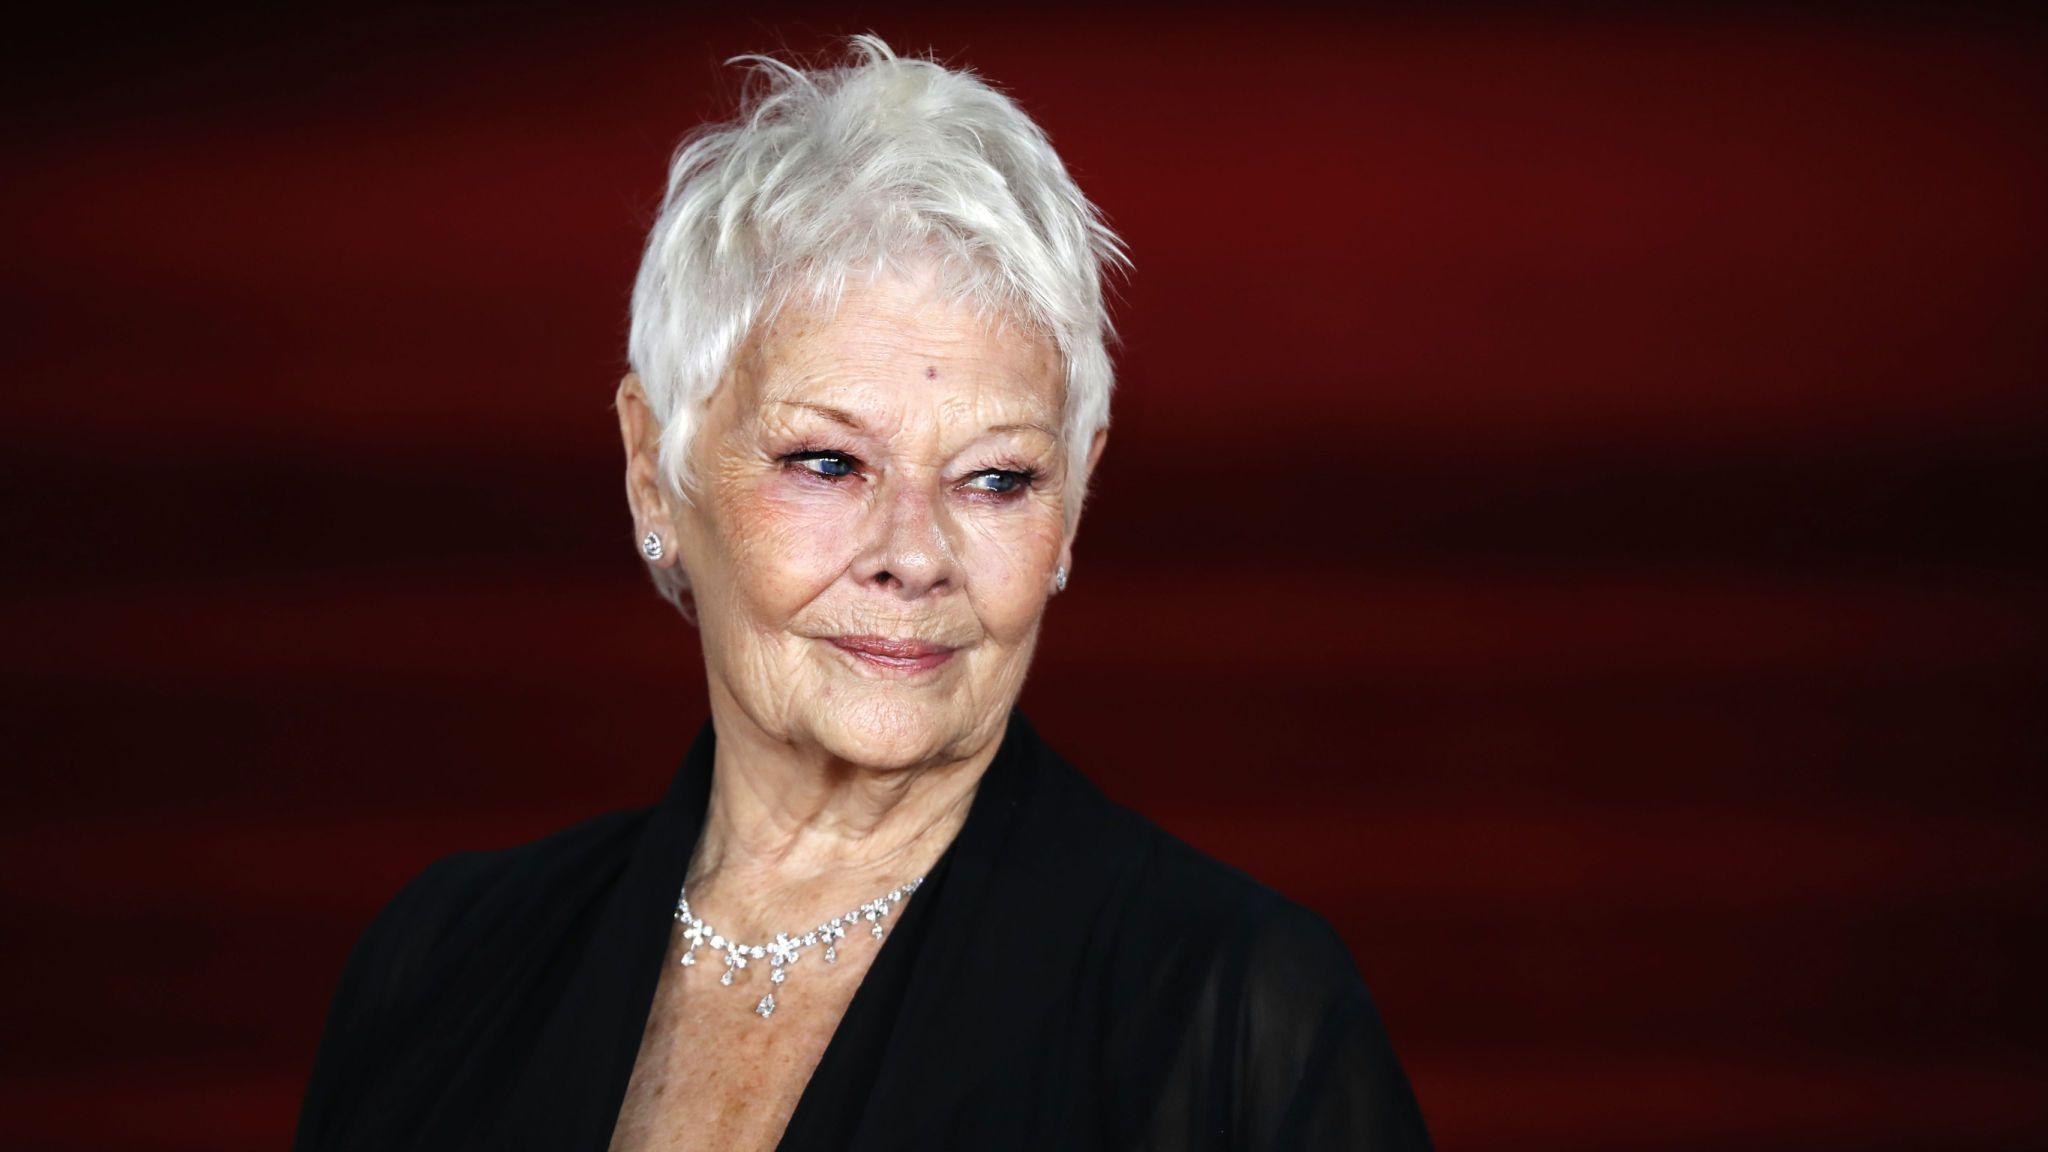 Dame Judi Dench: Hollywood sex scandal 'hard' as some accused are